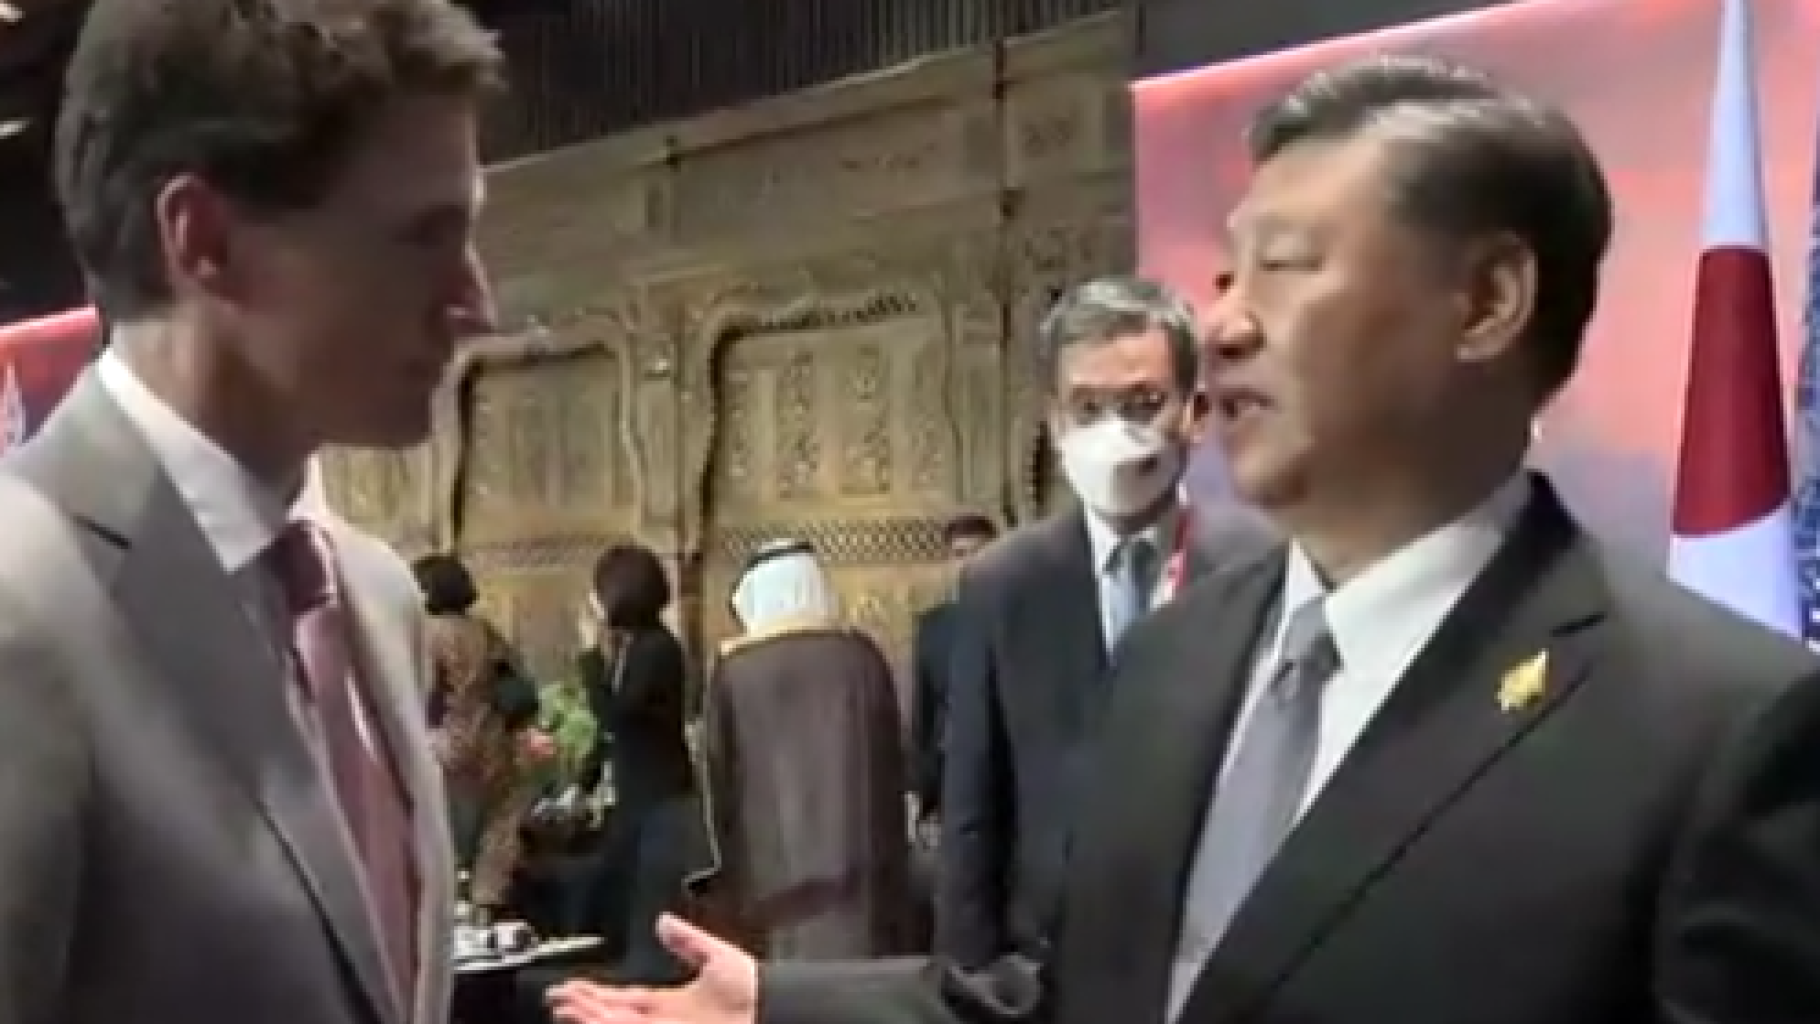 At the G20, Justin Trudeau was filmed by Xi Jinping on camera.